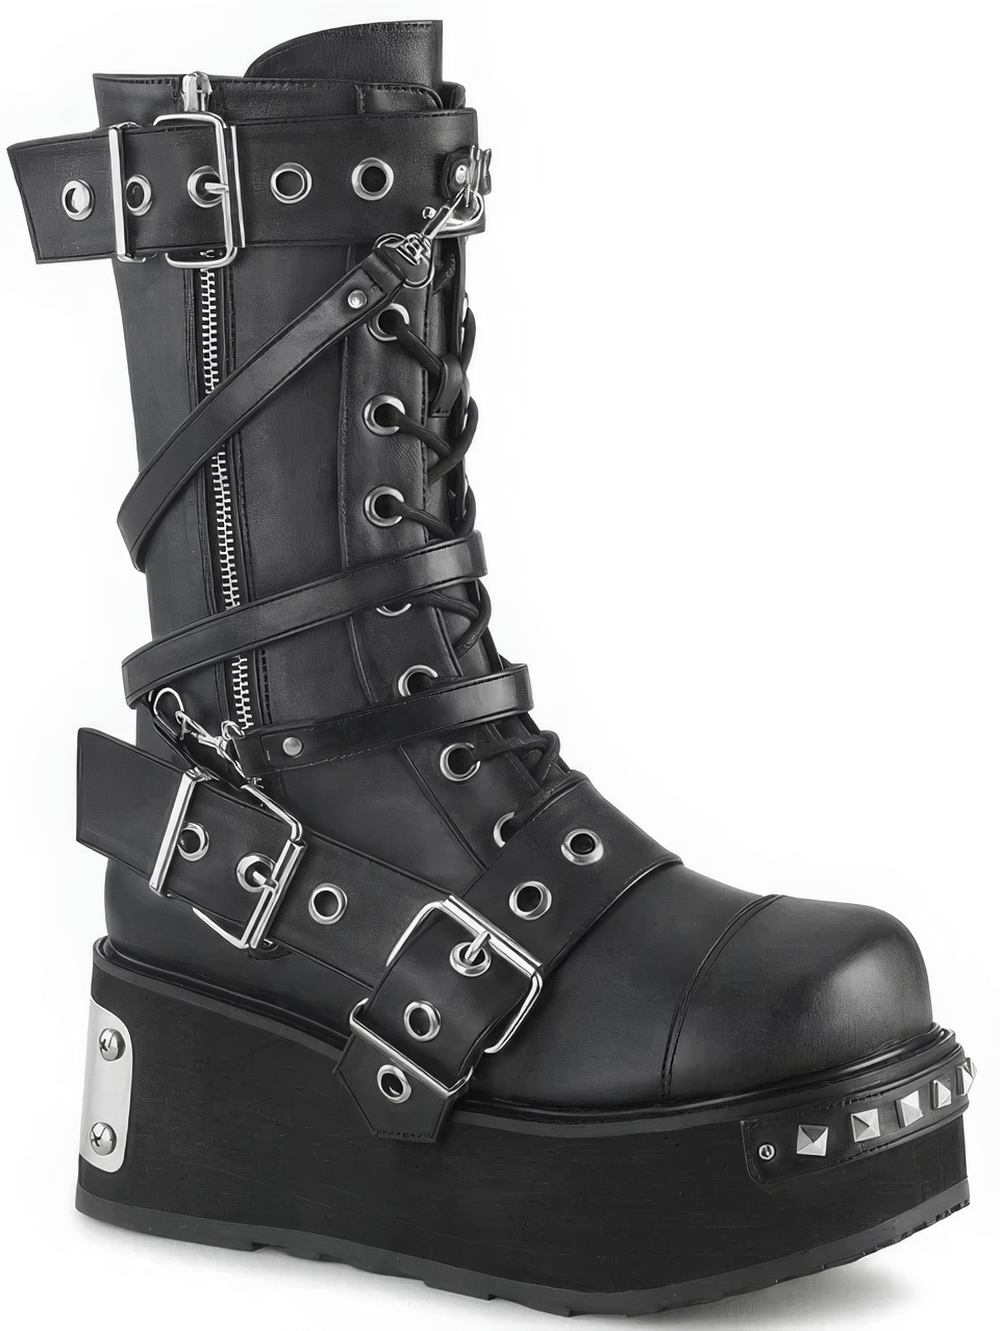 DEMONIA Black Mid-Calf Lace-Up Boots with Studs